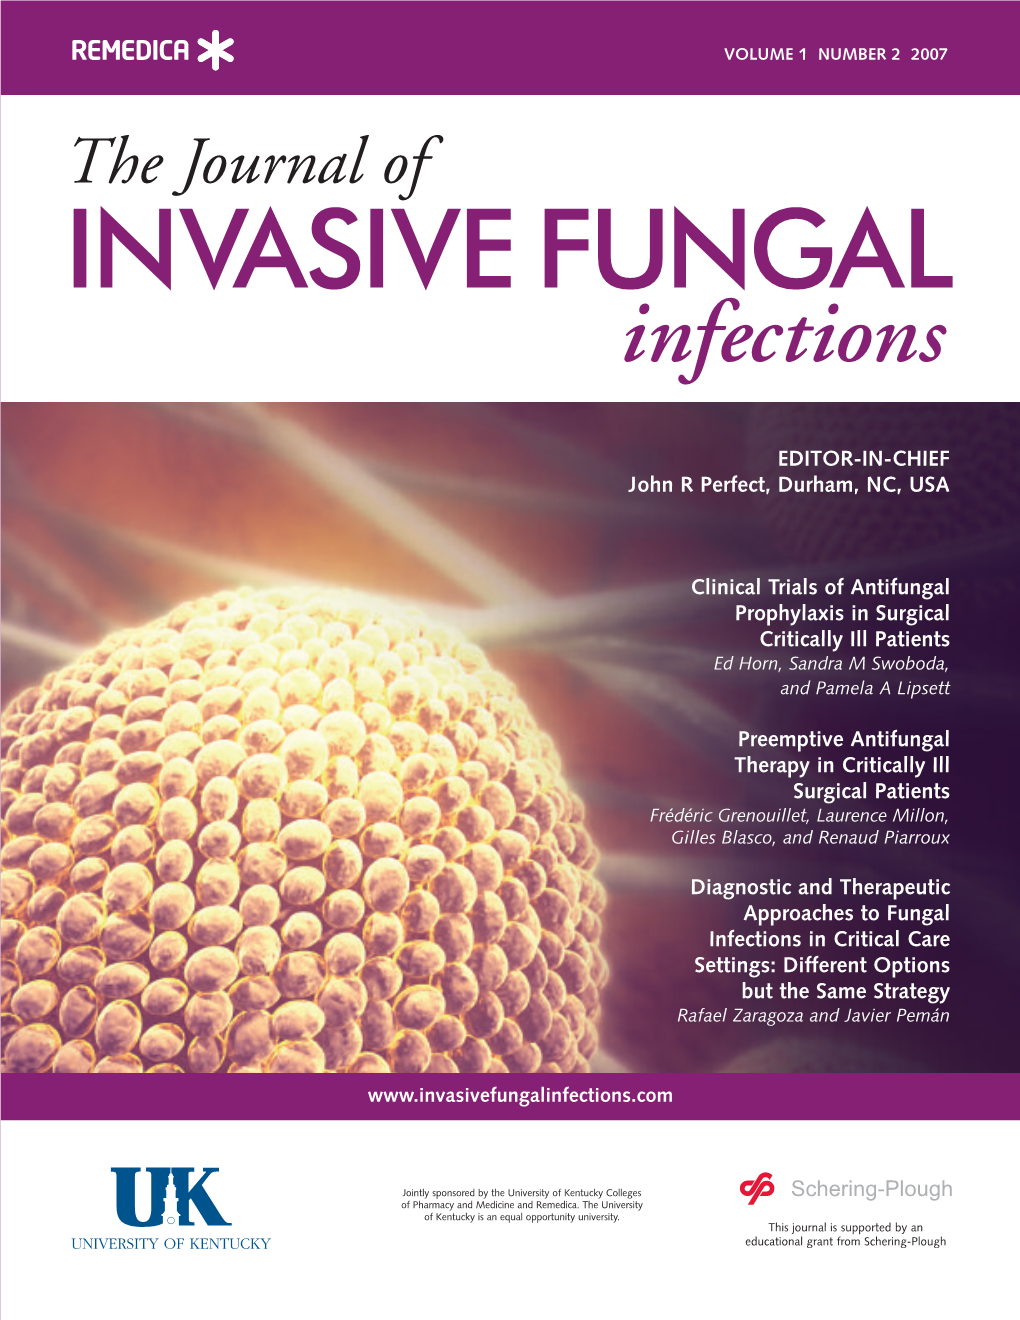 INVASIVE FUNGAL Infections